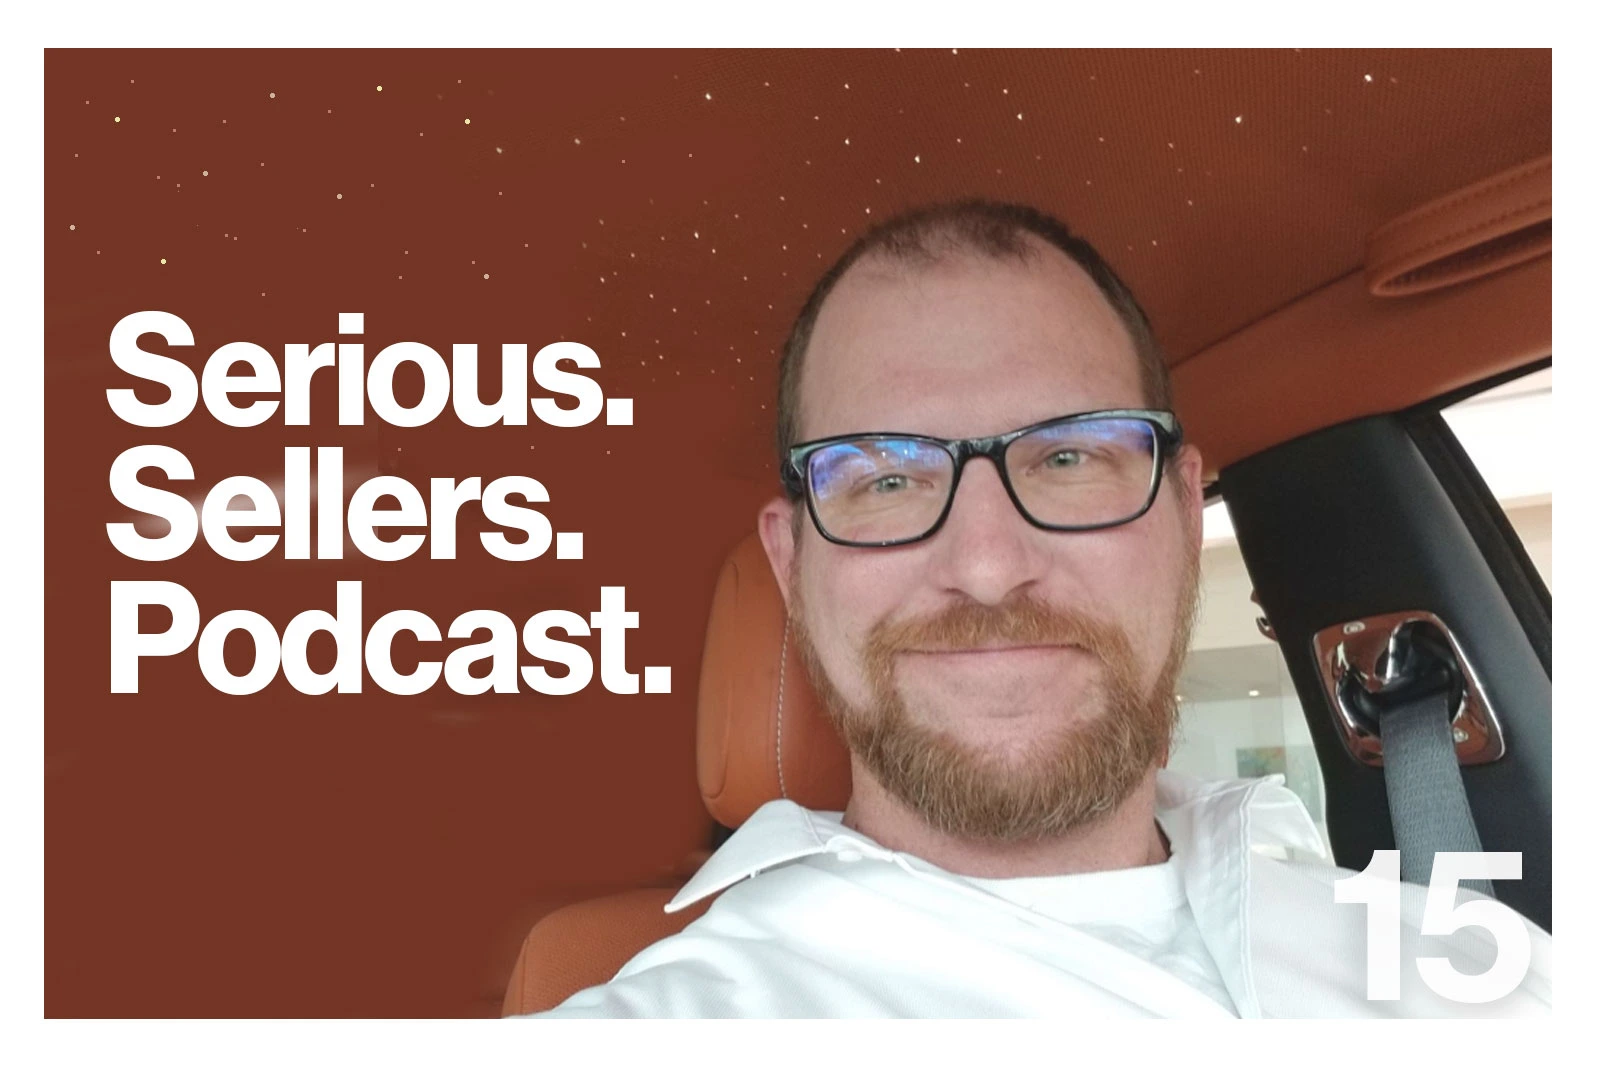 reviews on amazon, increase amazon reviews, serious sellers podcast, helium 10